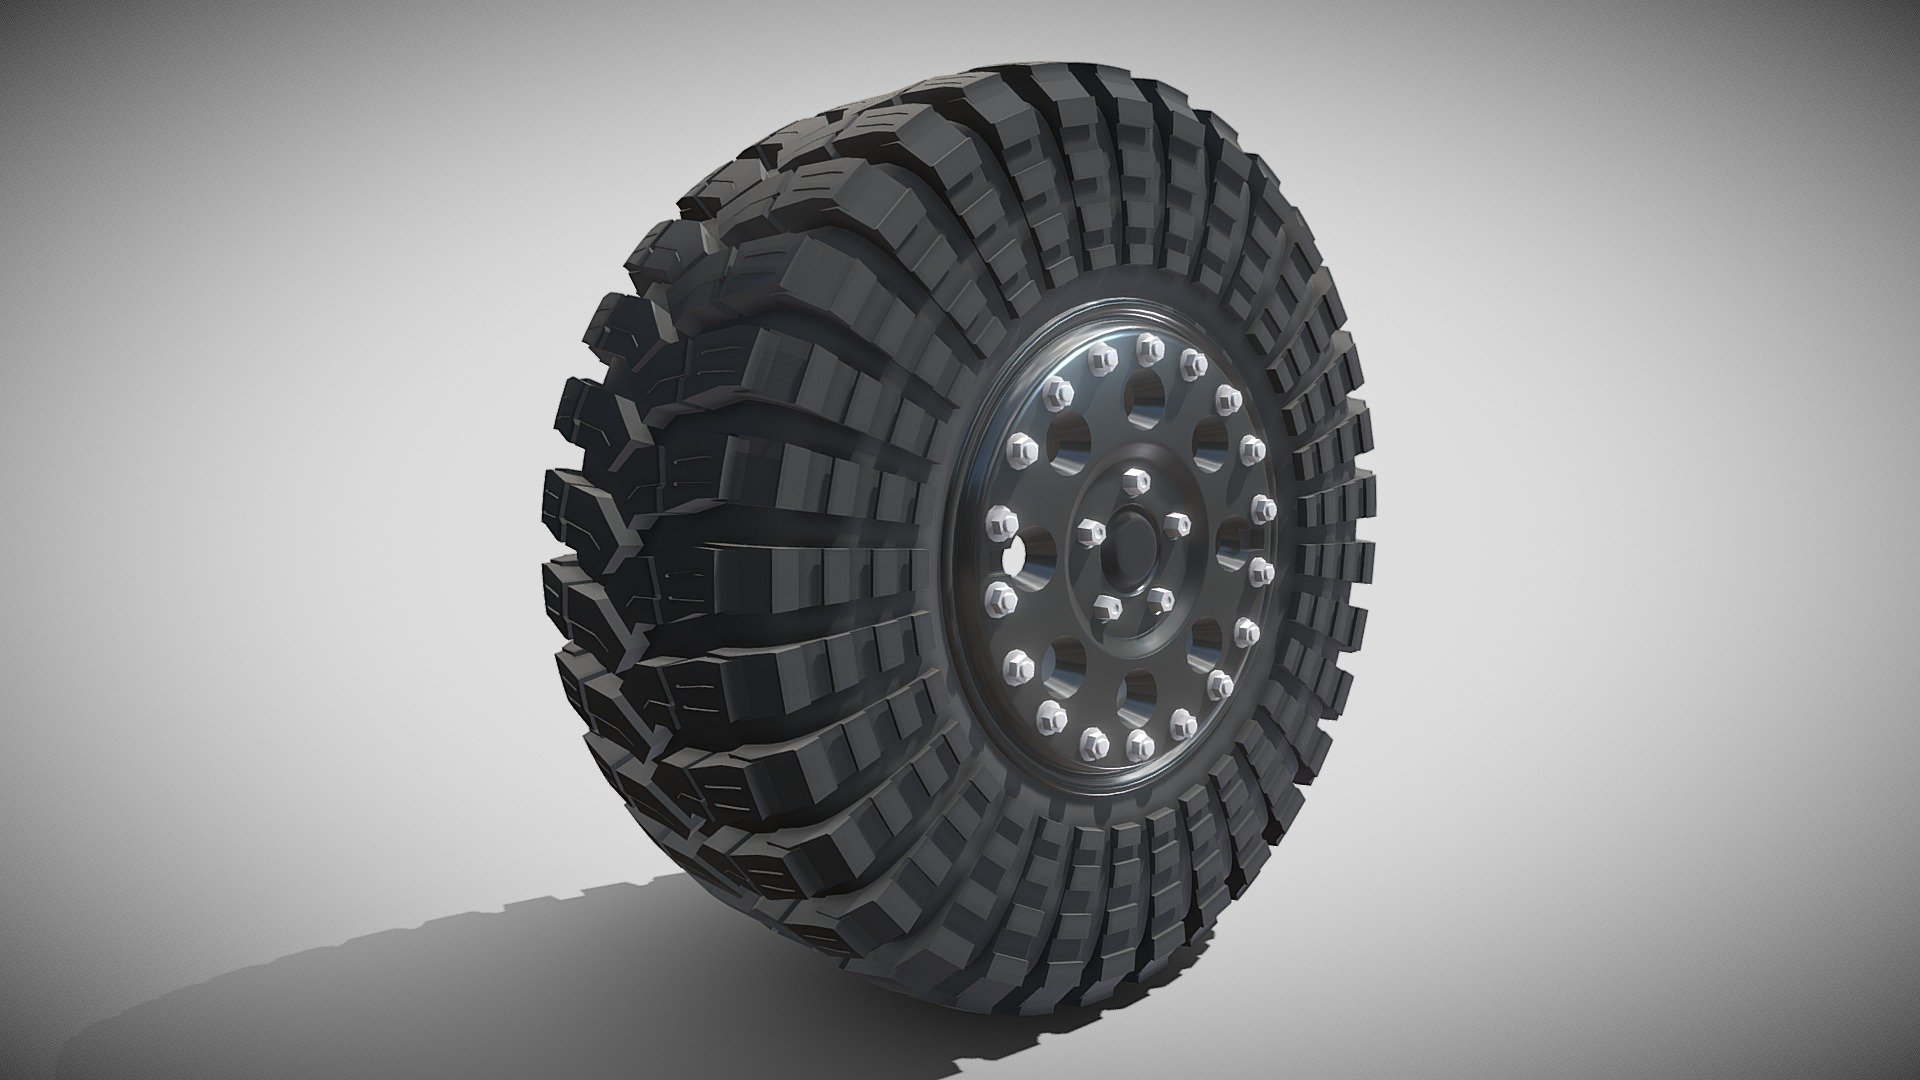 A very accurate model of a Tibus Wheel with Maxxis Trepador Tire.

File formats:
-.blend, rendered with cycles, as seen in the images;
-.obj, with materials applied and textures;
-.dae, with materials applied and textures;
-.fbx, with material slots applied;
-.stl;

3D Software:
This 3d model was originally created in Blender 2.79 and rendered with Cycles.

Materials and textures:
The model has materials applied in all formats, and is ready to import and render.
The model comes with multiple png image textures.

Preview scenes:
The preview images are rendered in Blender using its built-in render engine &lsquo;Cycles'.
Note that the blend files come directly with the rendering scene included and the render command will generate the exact result as seen in previews.
Scene elements are on a different layer from the actual model for easier manipulation of objects.

General:
The model is built strictly out of quads and is subdivisable.
It comes in separate parts, named correctly for the sake of convenience 3d model